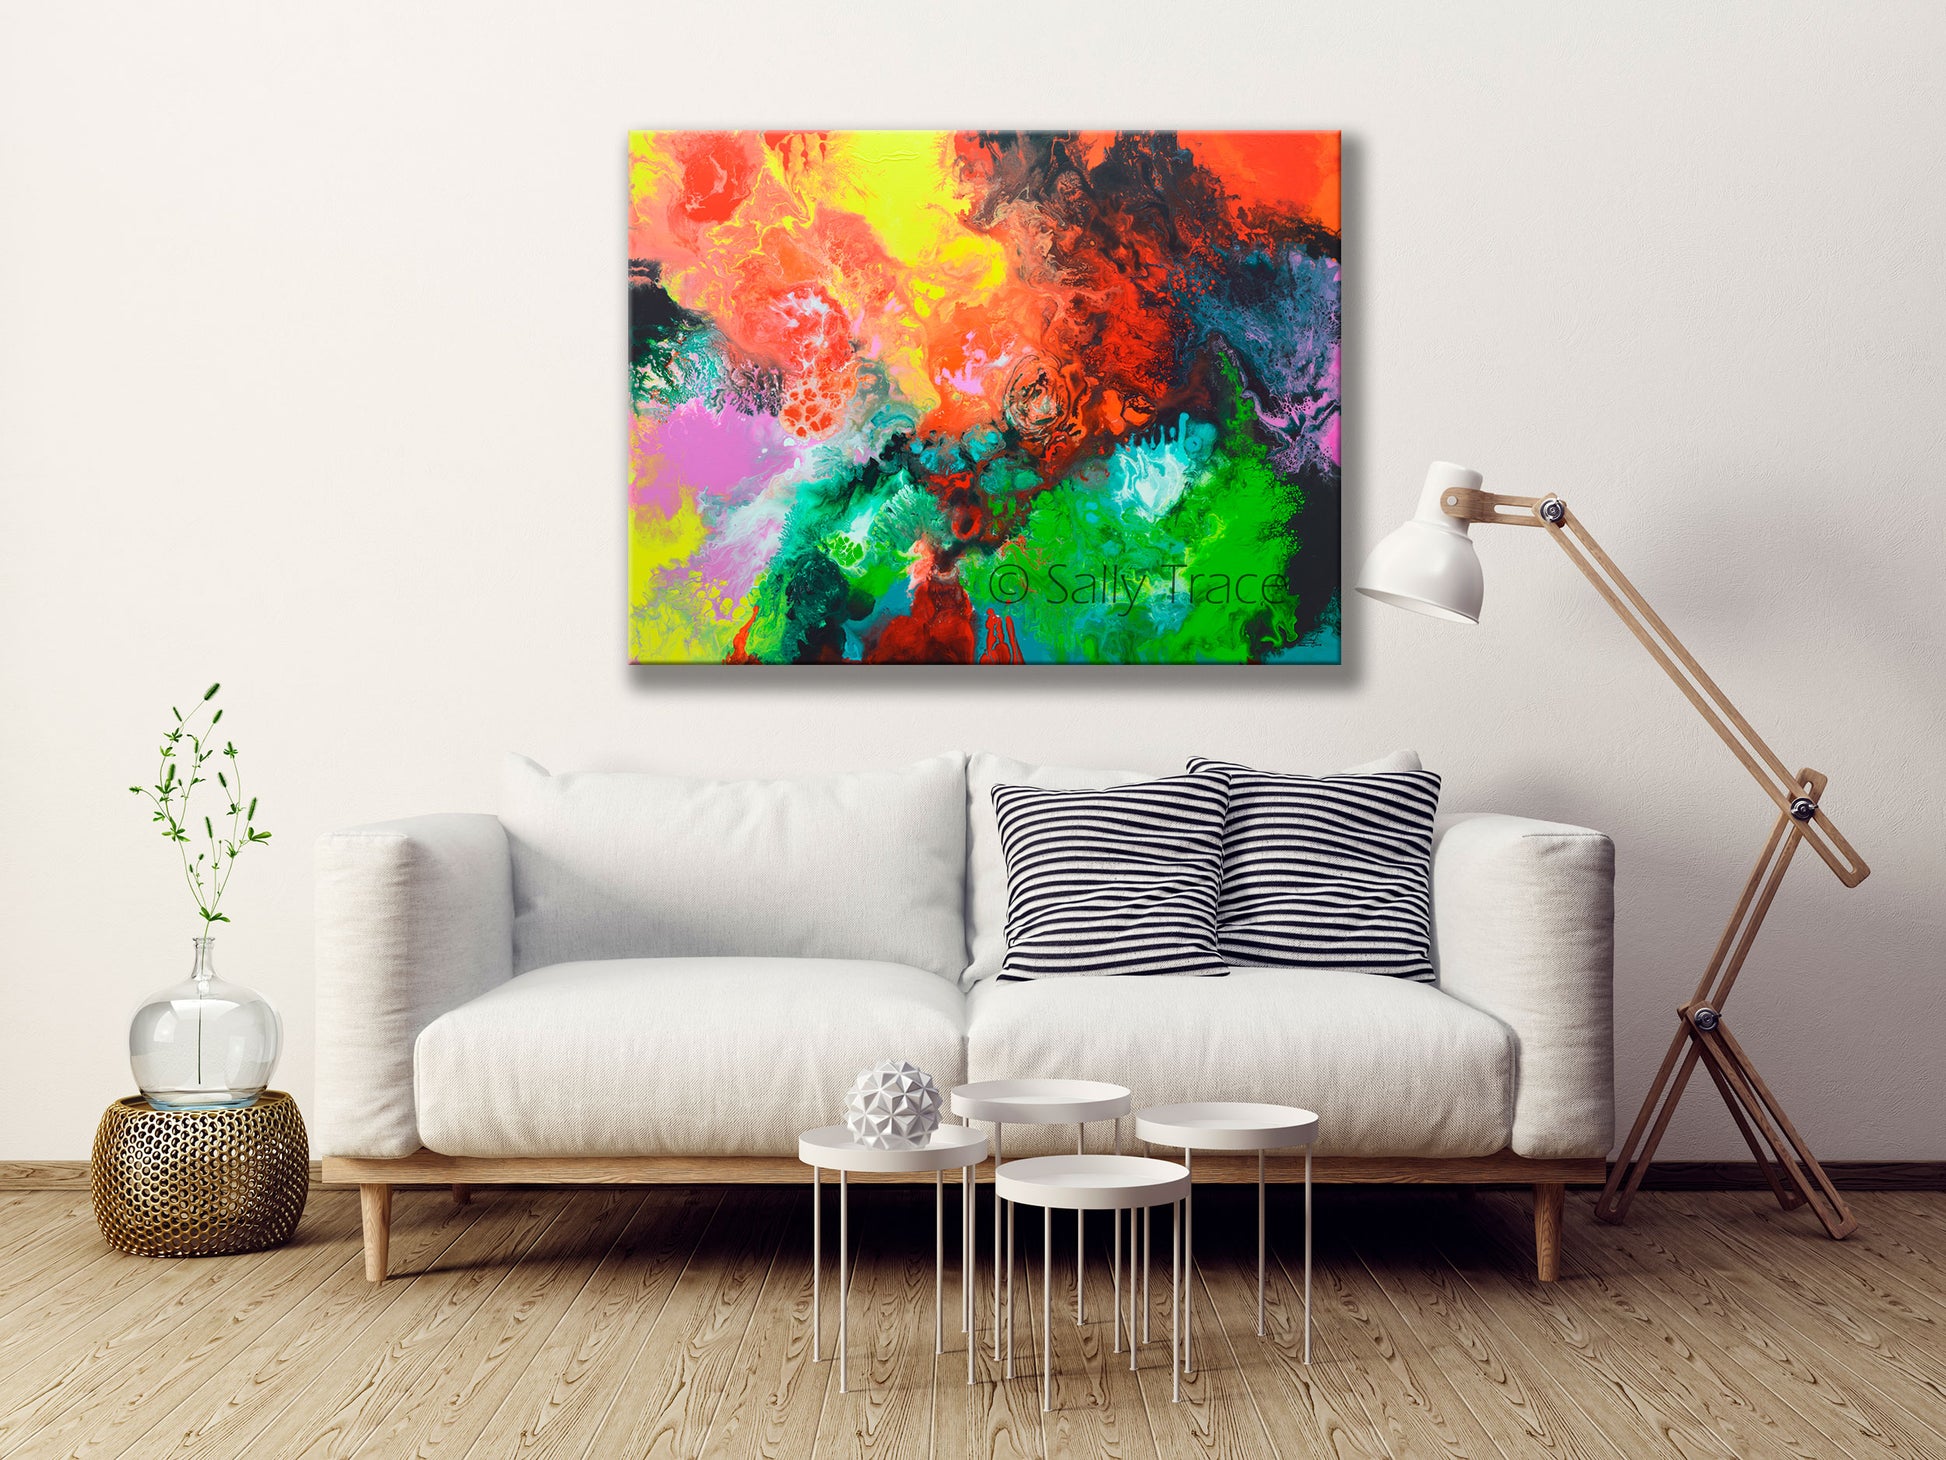 Modern art giclee print on stretched canvas from the original fluid art painting "Origin" by Sally Trace, contemporary art